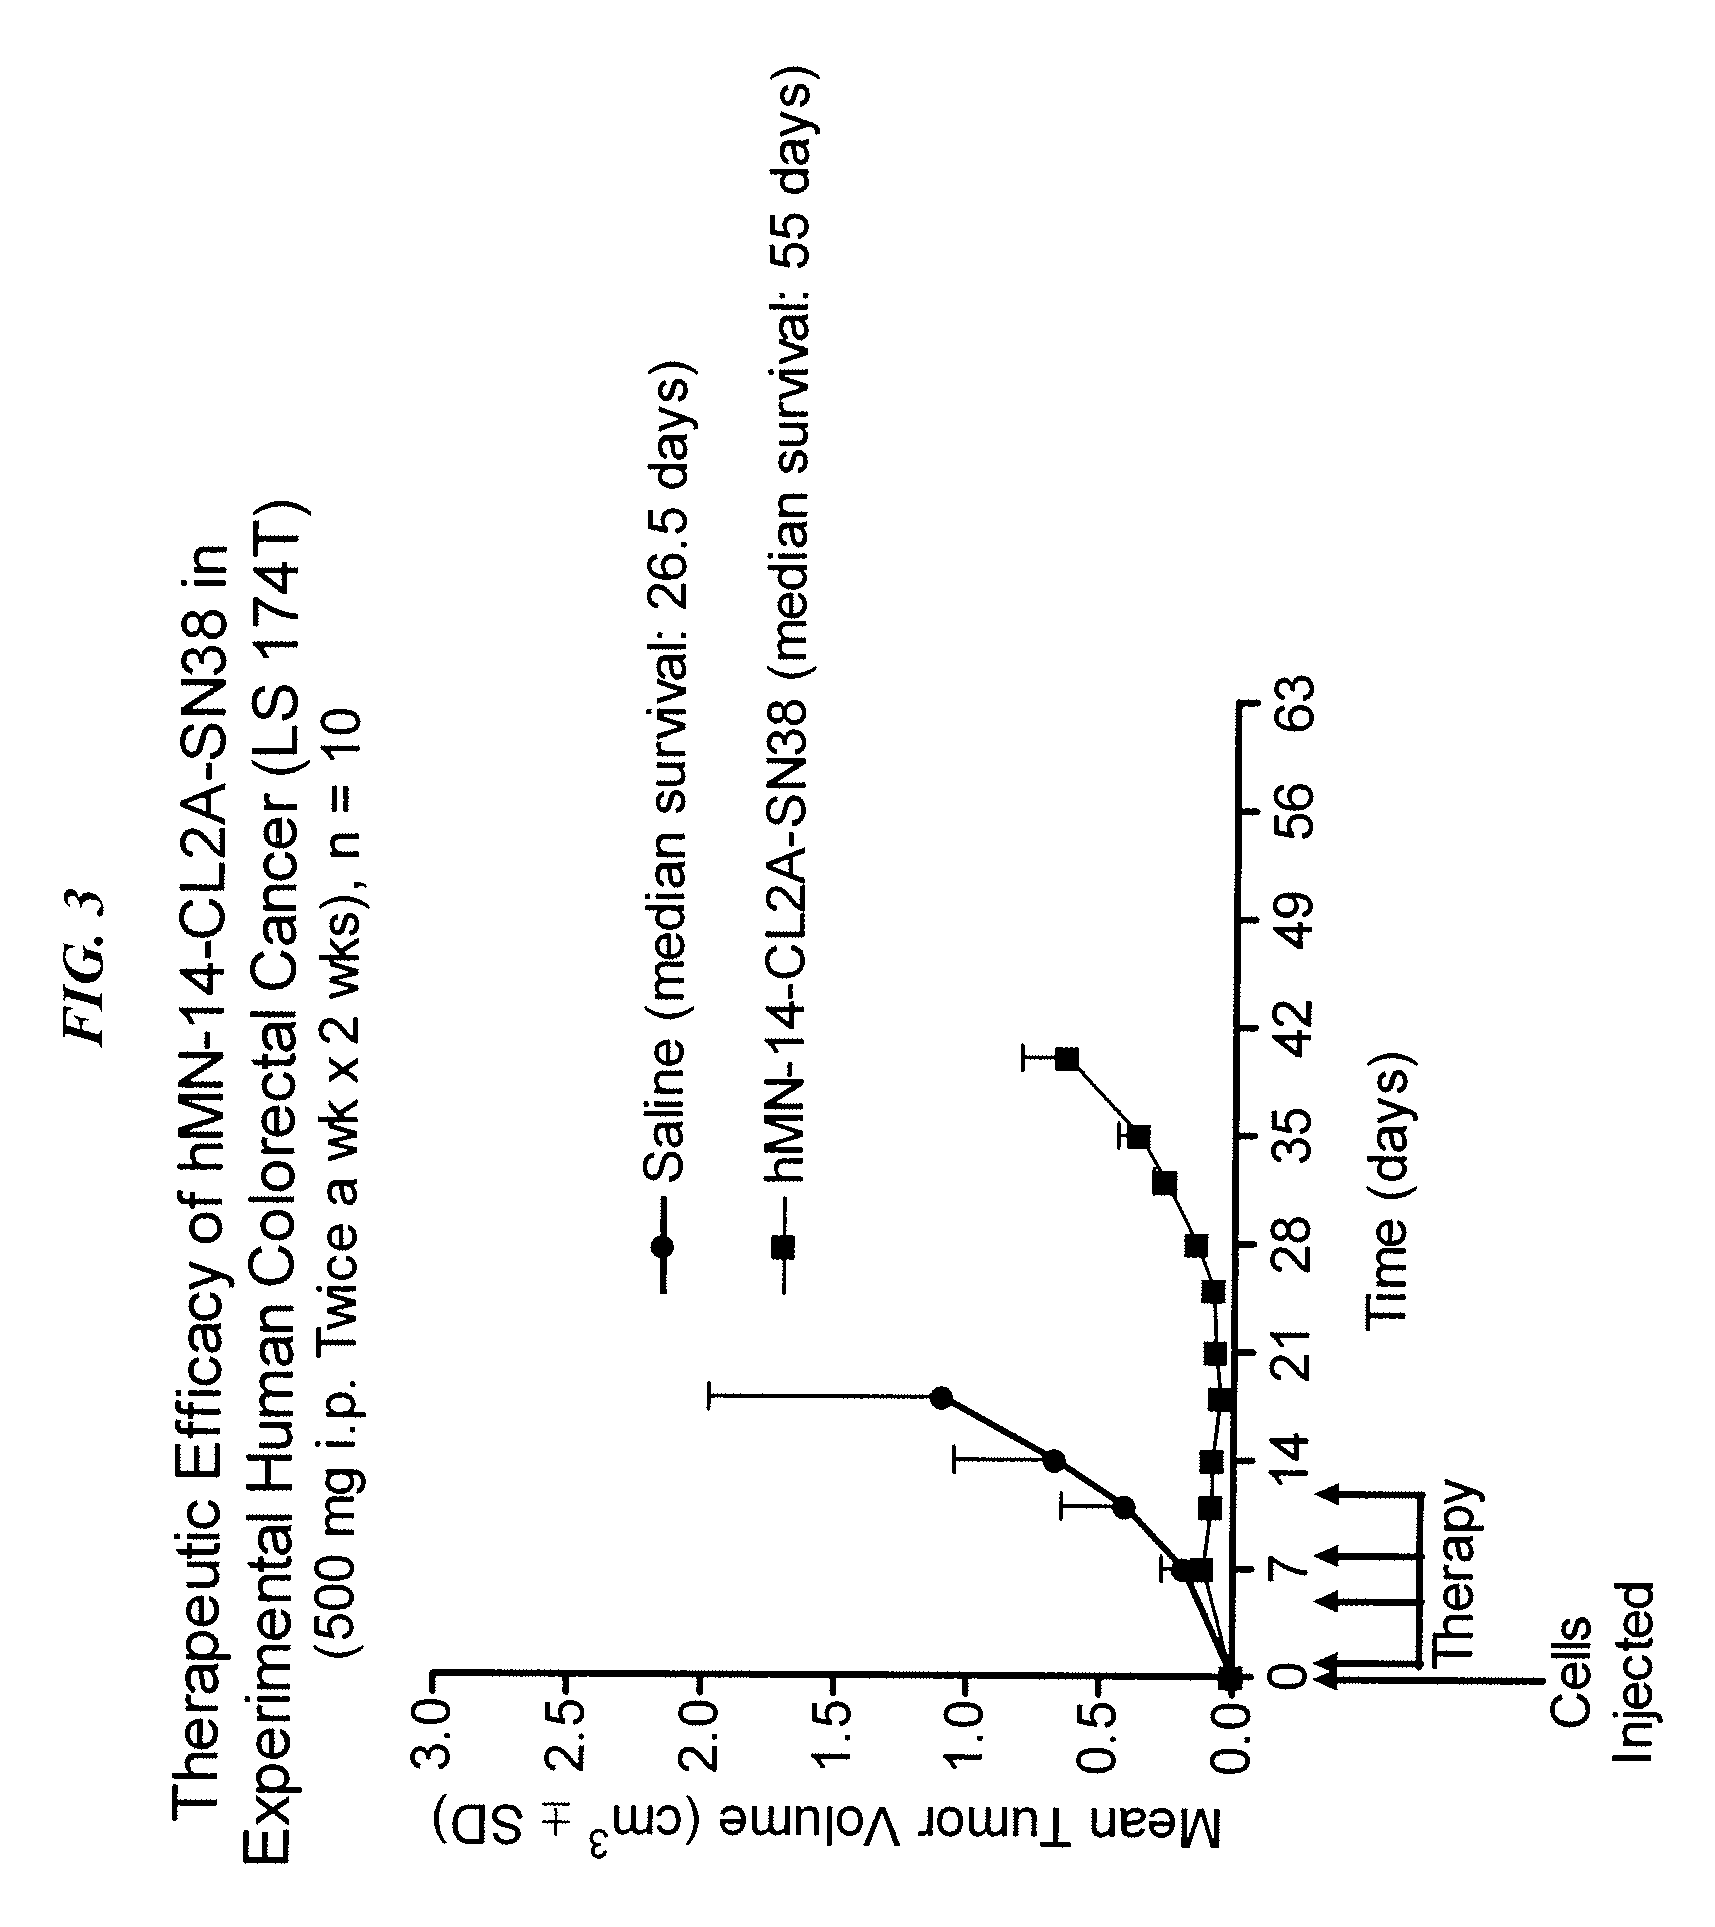 Immunoconjugates with an intracellularly-cleavable linkage